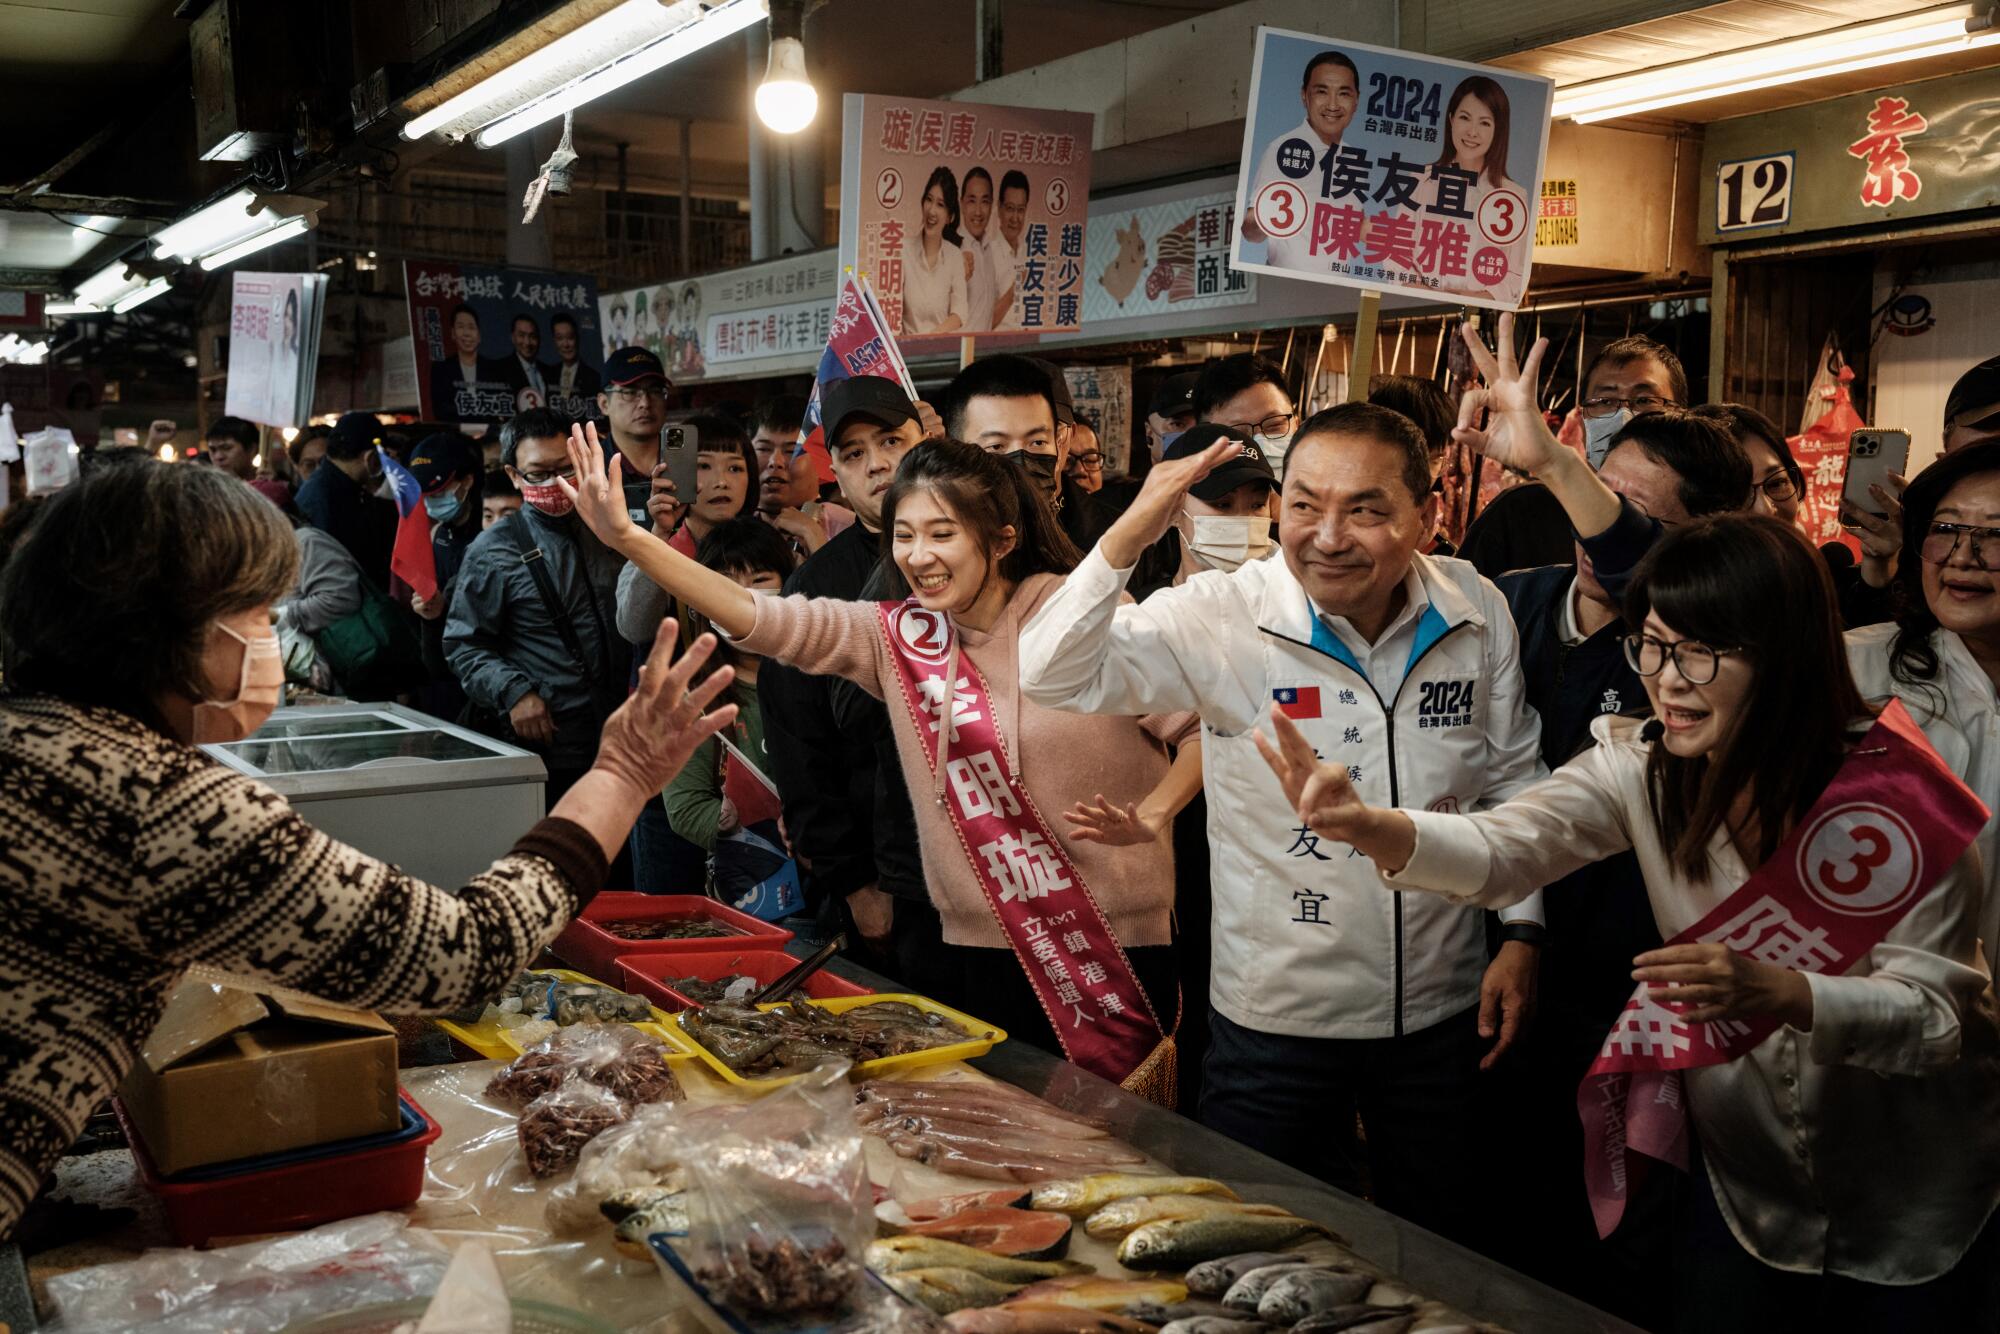 A political candidate and supporters in a crowded market